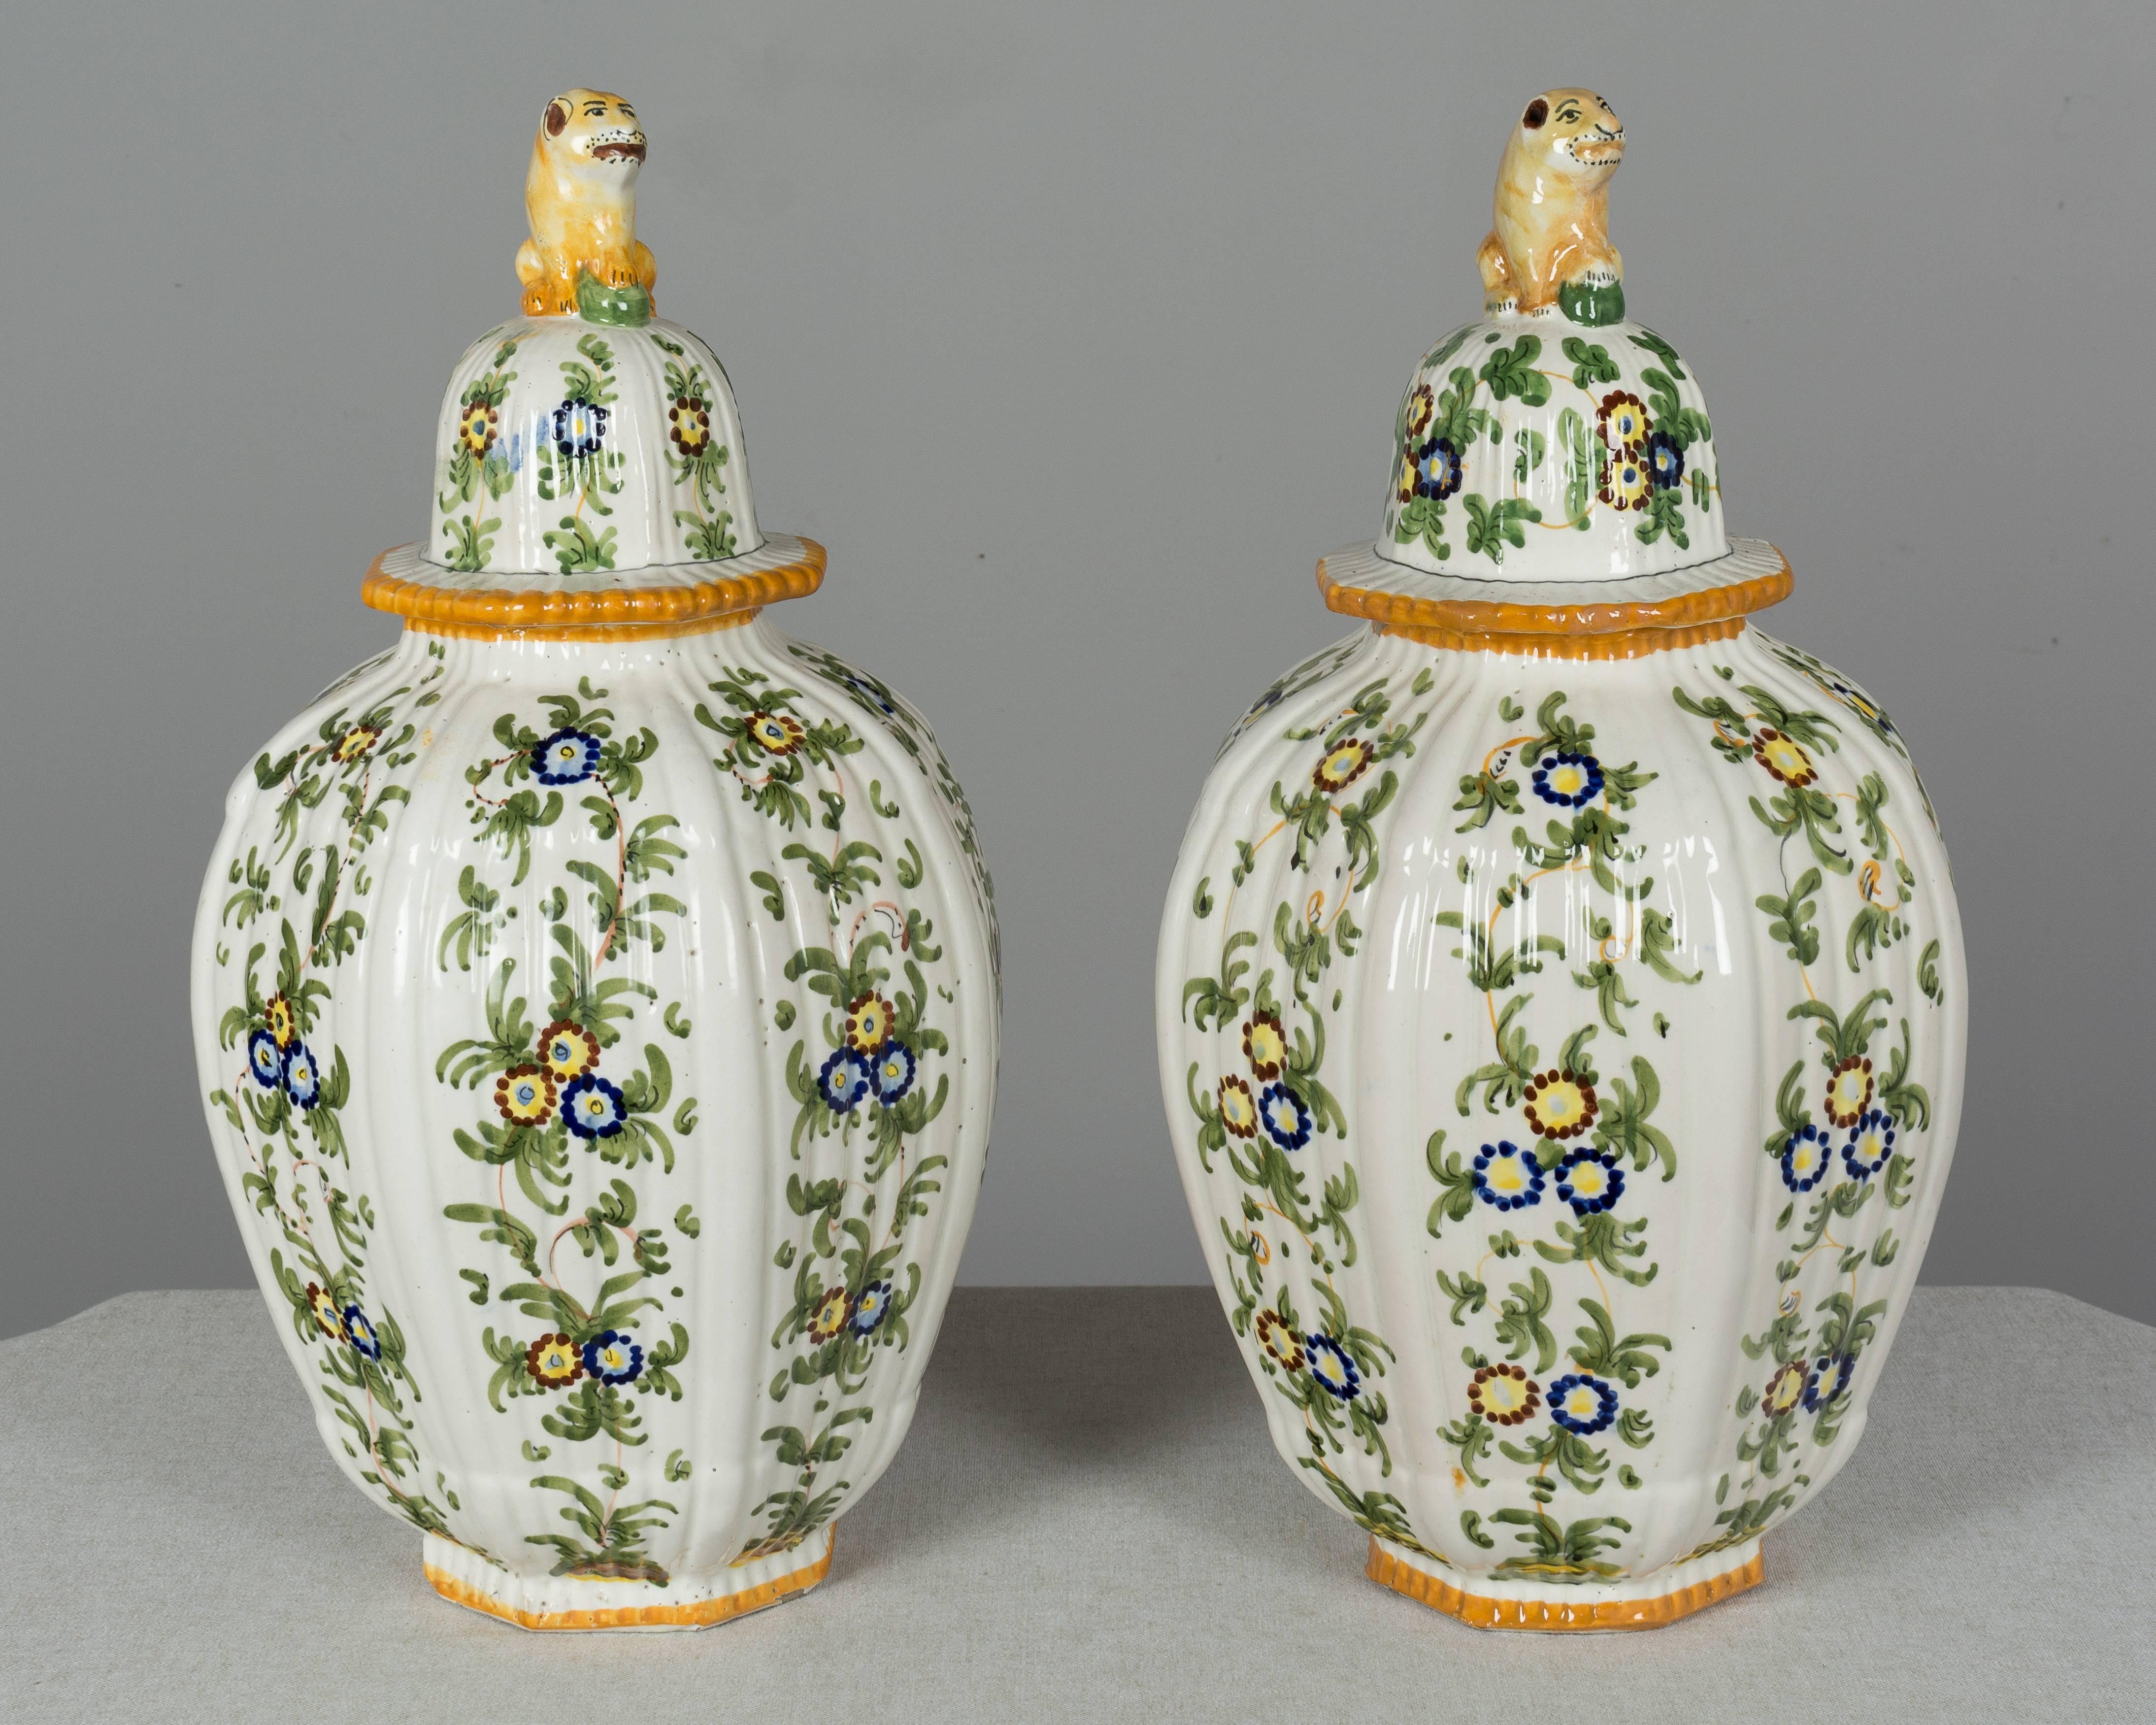 A pair of Italian faience ginger jars with traditional ribbed urn form and lids topped with foo lion knobs. Each with hand painted floral decoration in green with yellow trim. The lion on one of the lids was broken has been professionally restored.